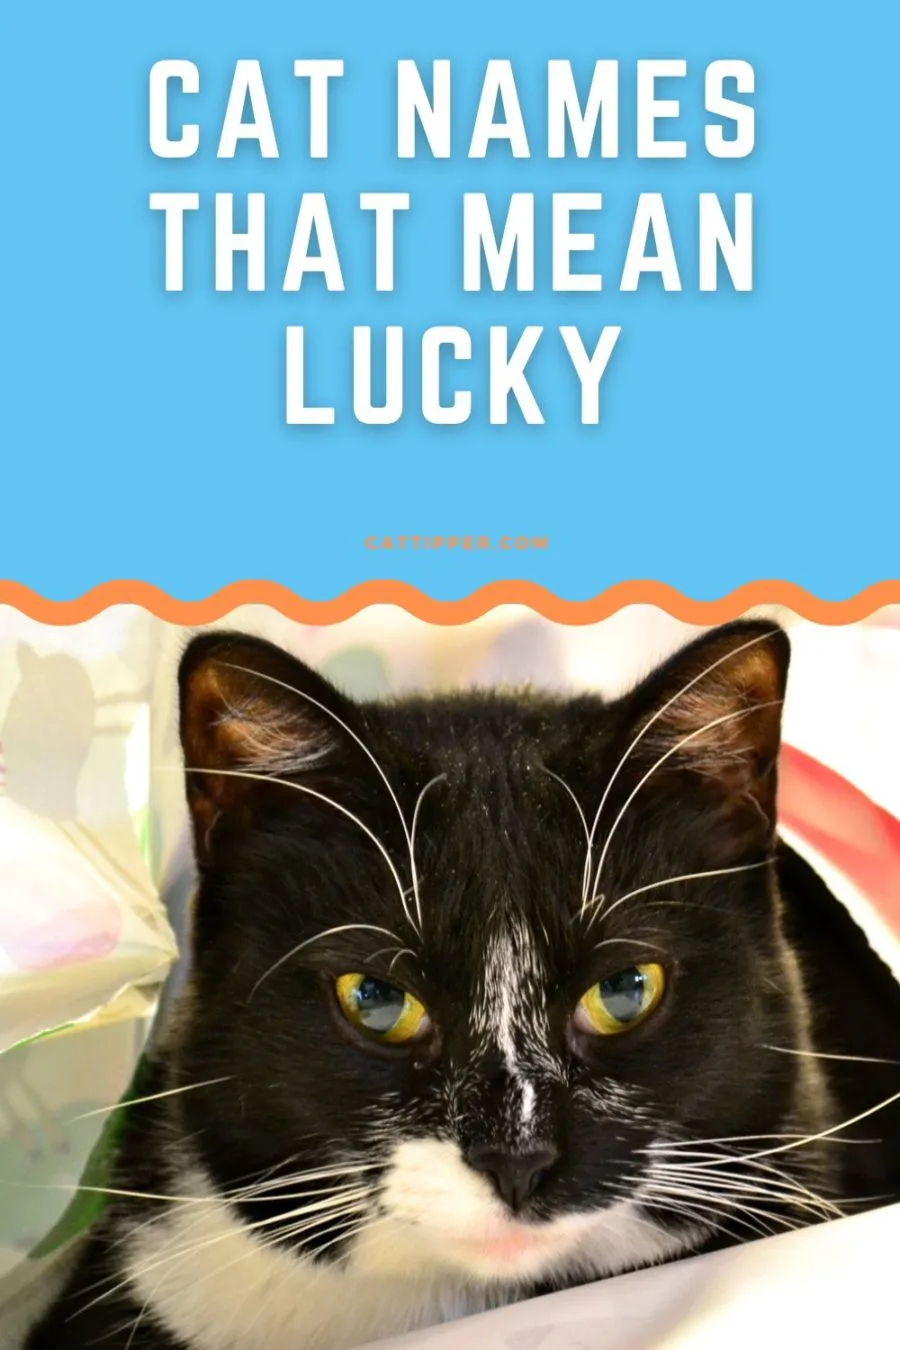 Cat Names that Mean Lucky